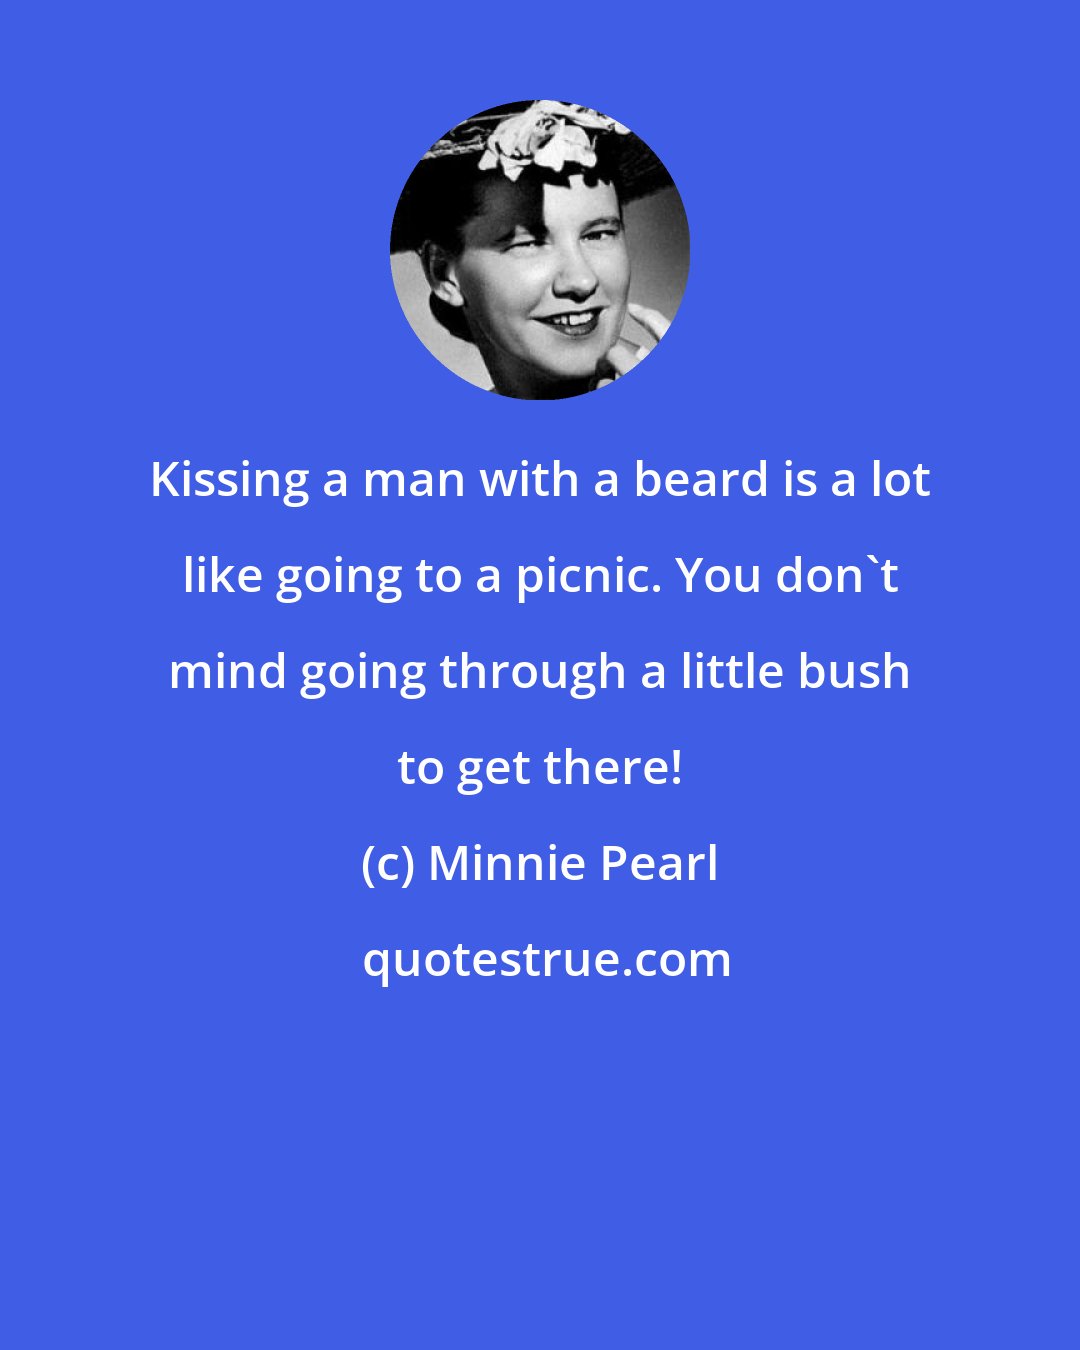 Minnie Pearl: Kissing a man with a beard is a lot like going to a picnic. You don't mind going through a little bush to get there!